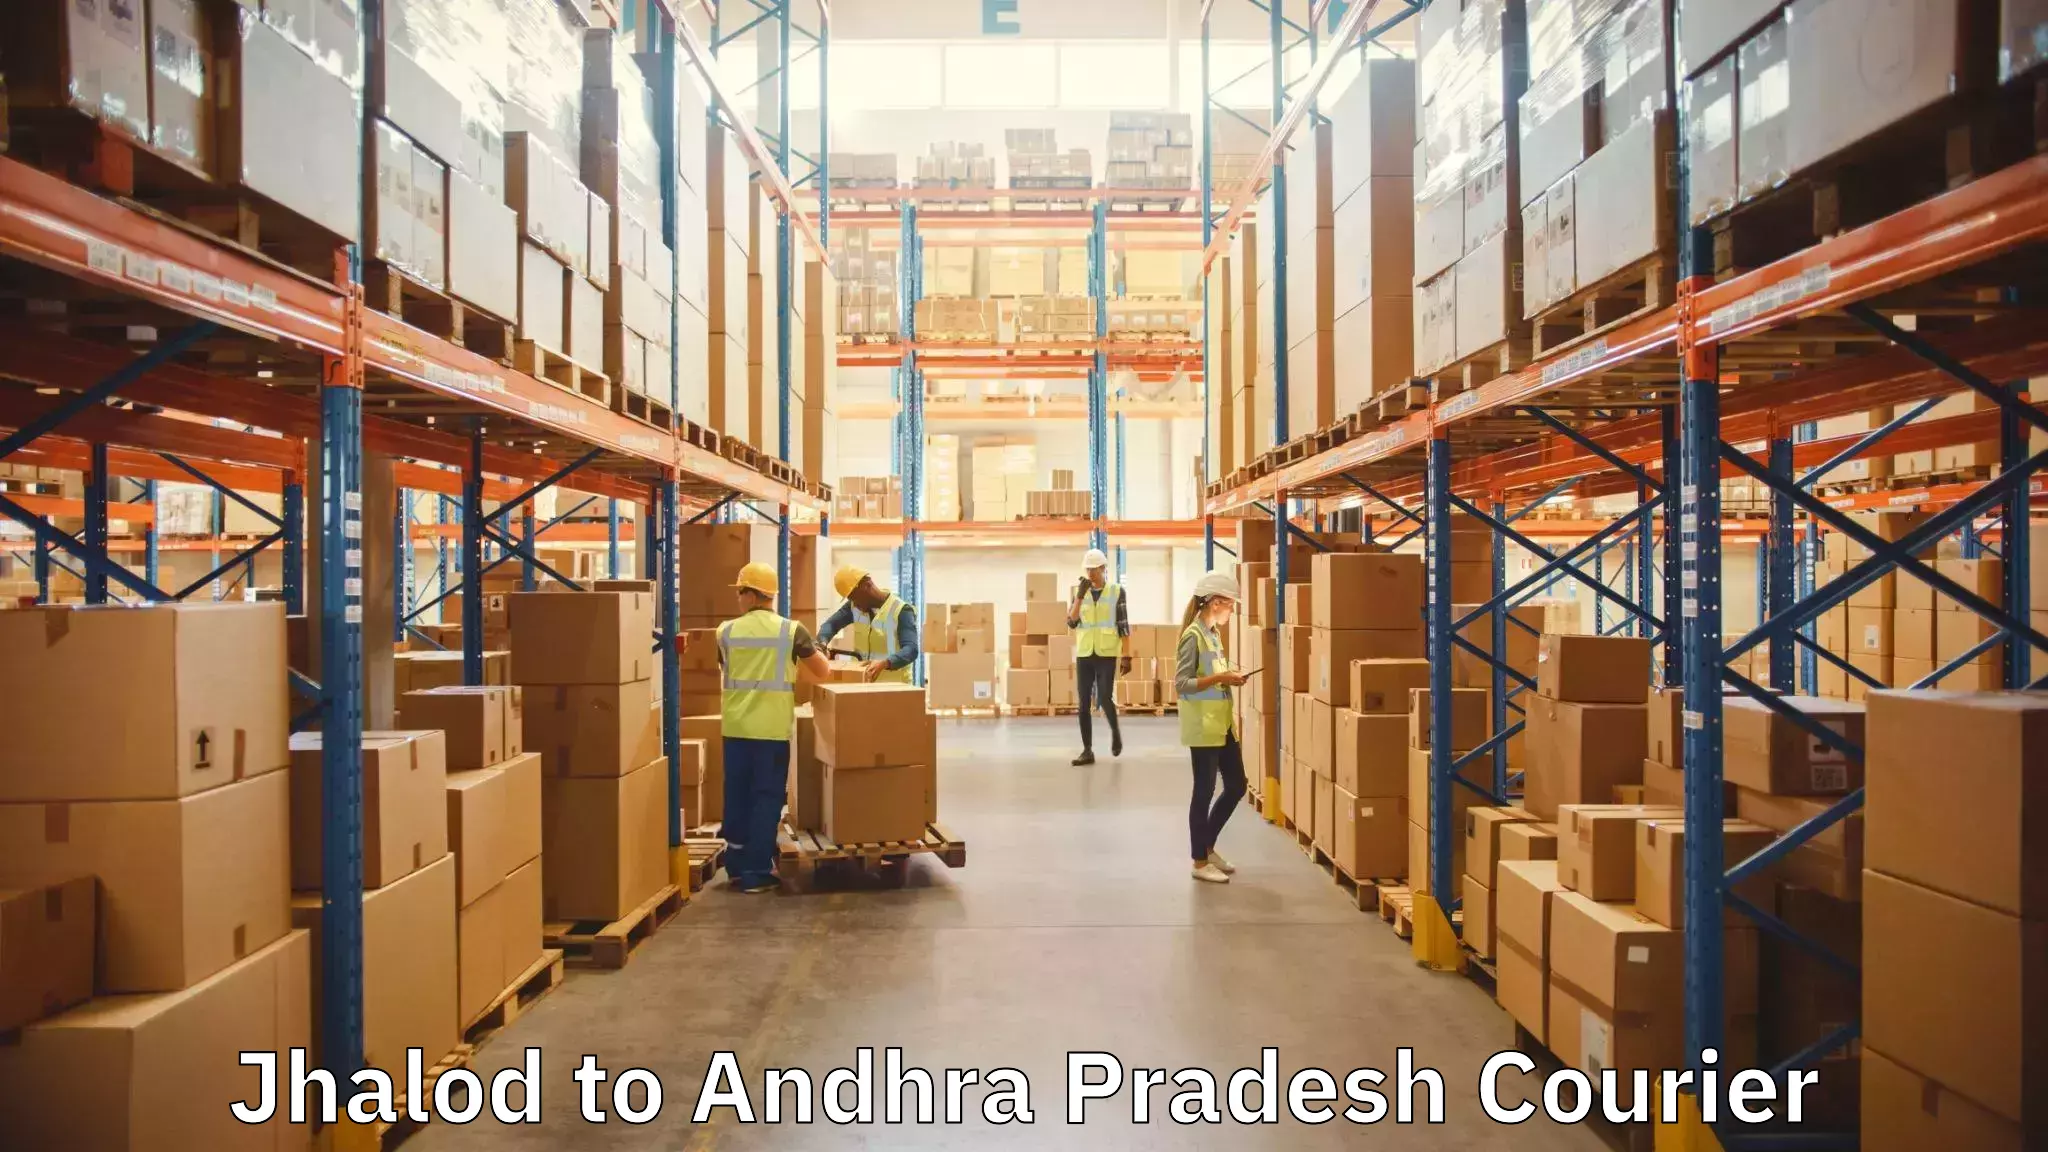 Customized relocation services Jhalod to Gopalapatnam